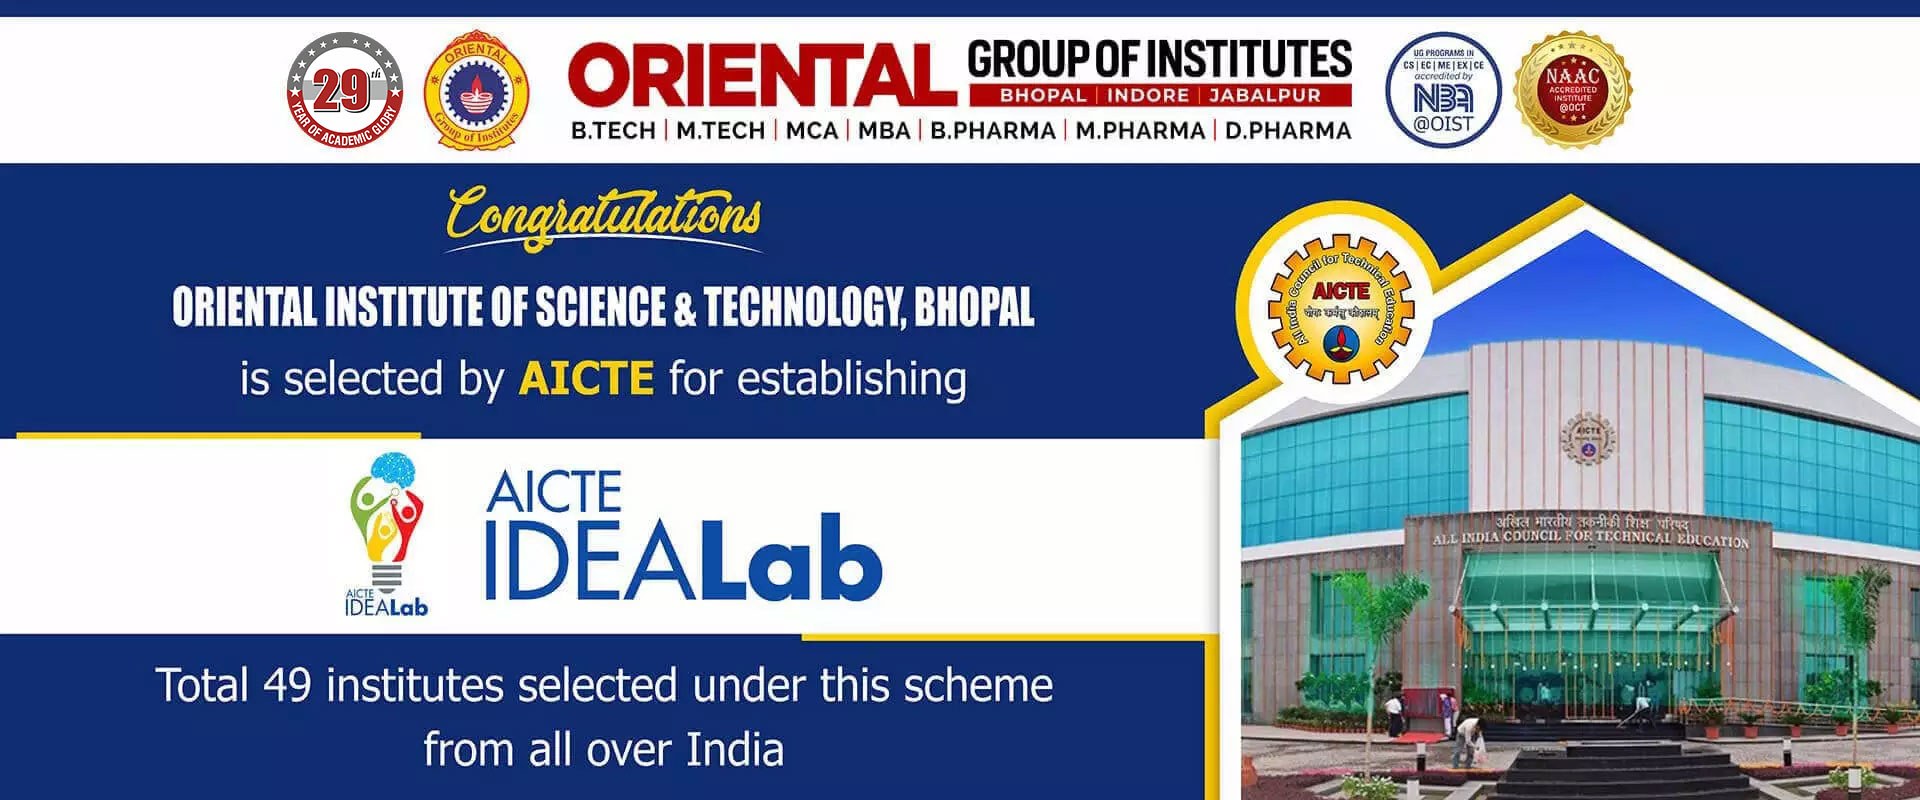 About - Oriental Group of Institutes